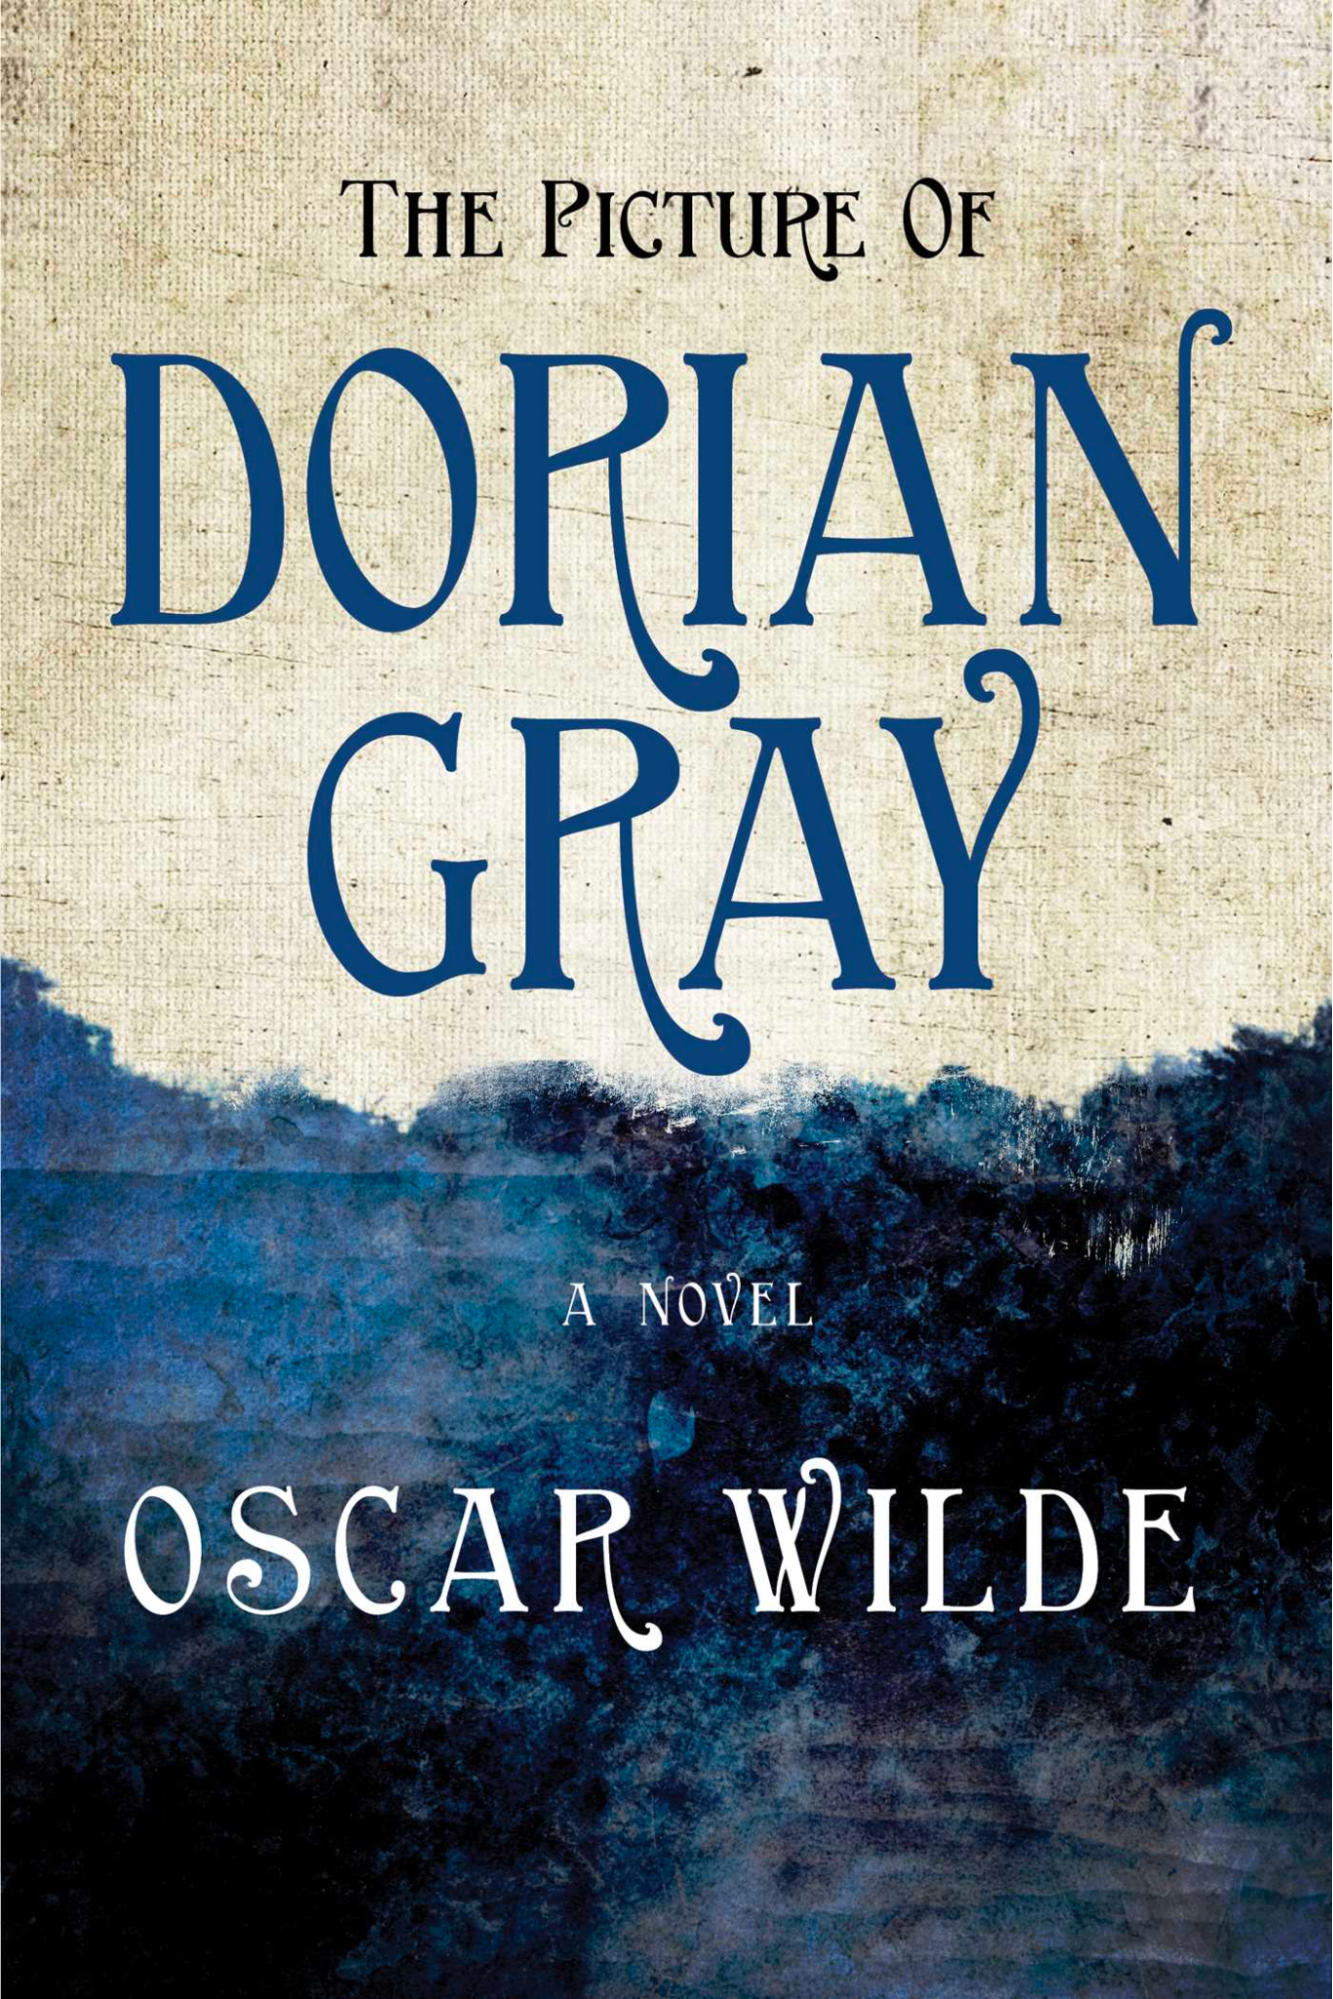 Book Review: The Picture of Dorian Gray